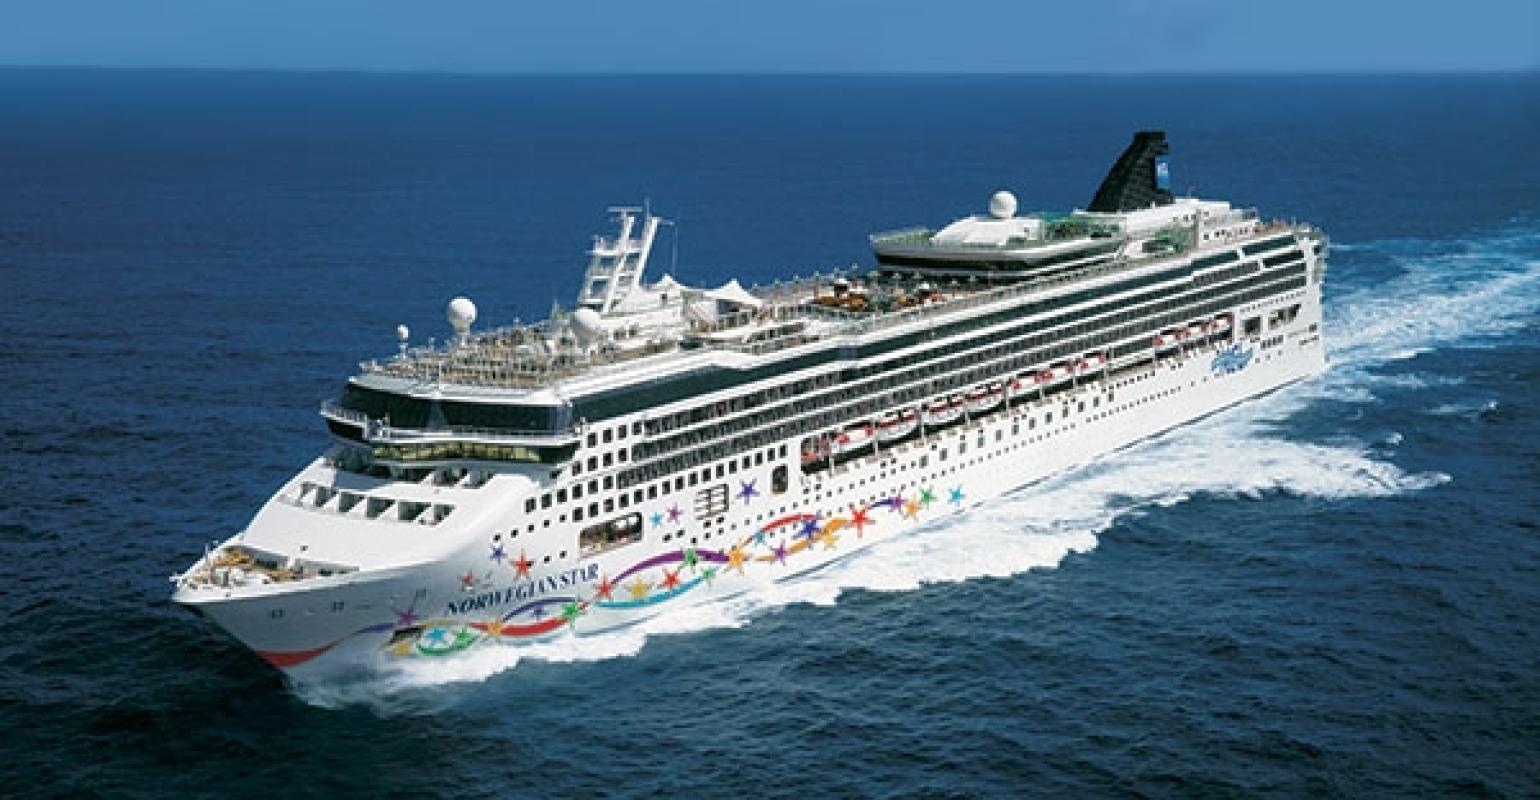 Larger NCL ship for South America in 2019/20